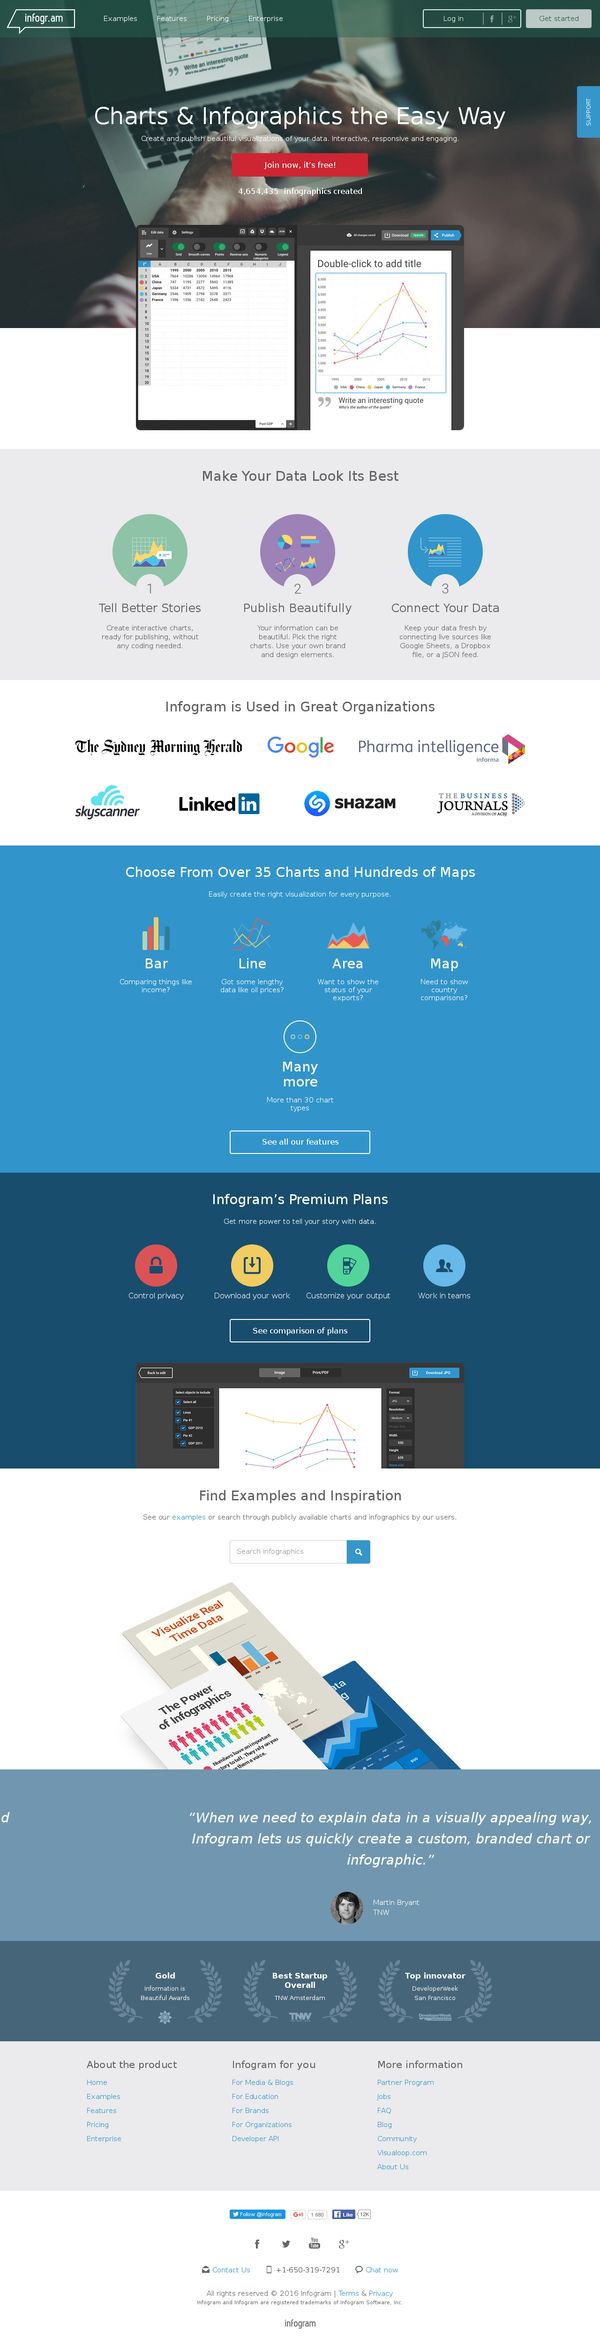 Create online charts & infographics | infogr.am